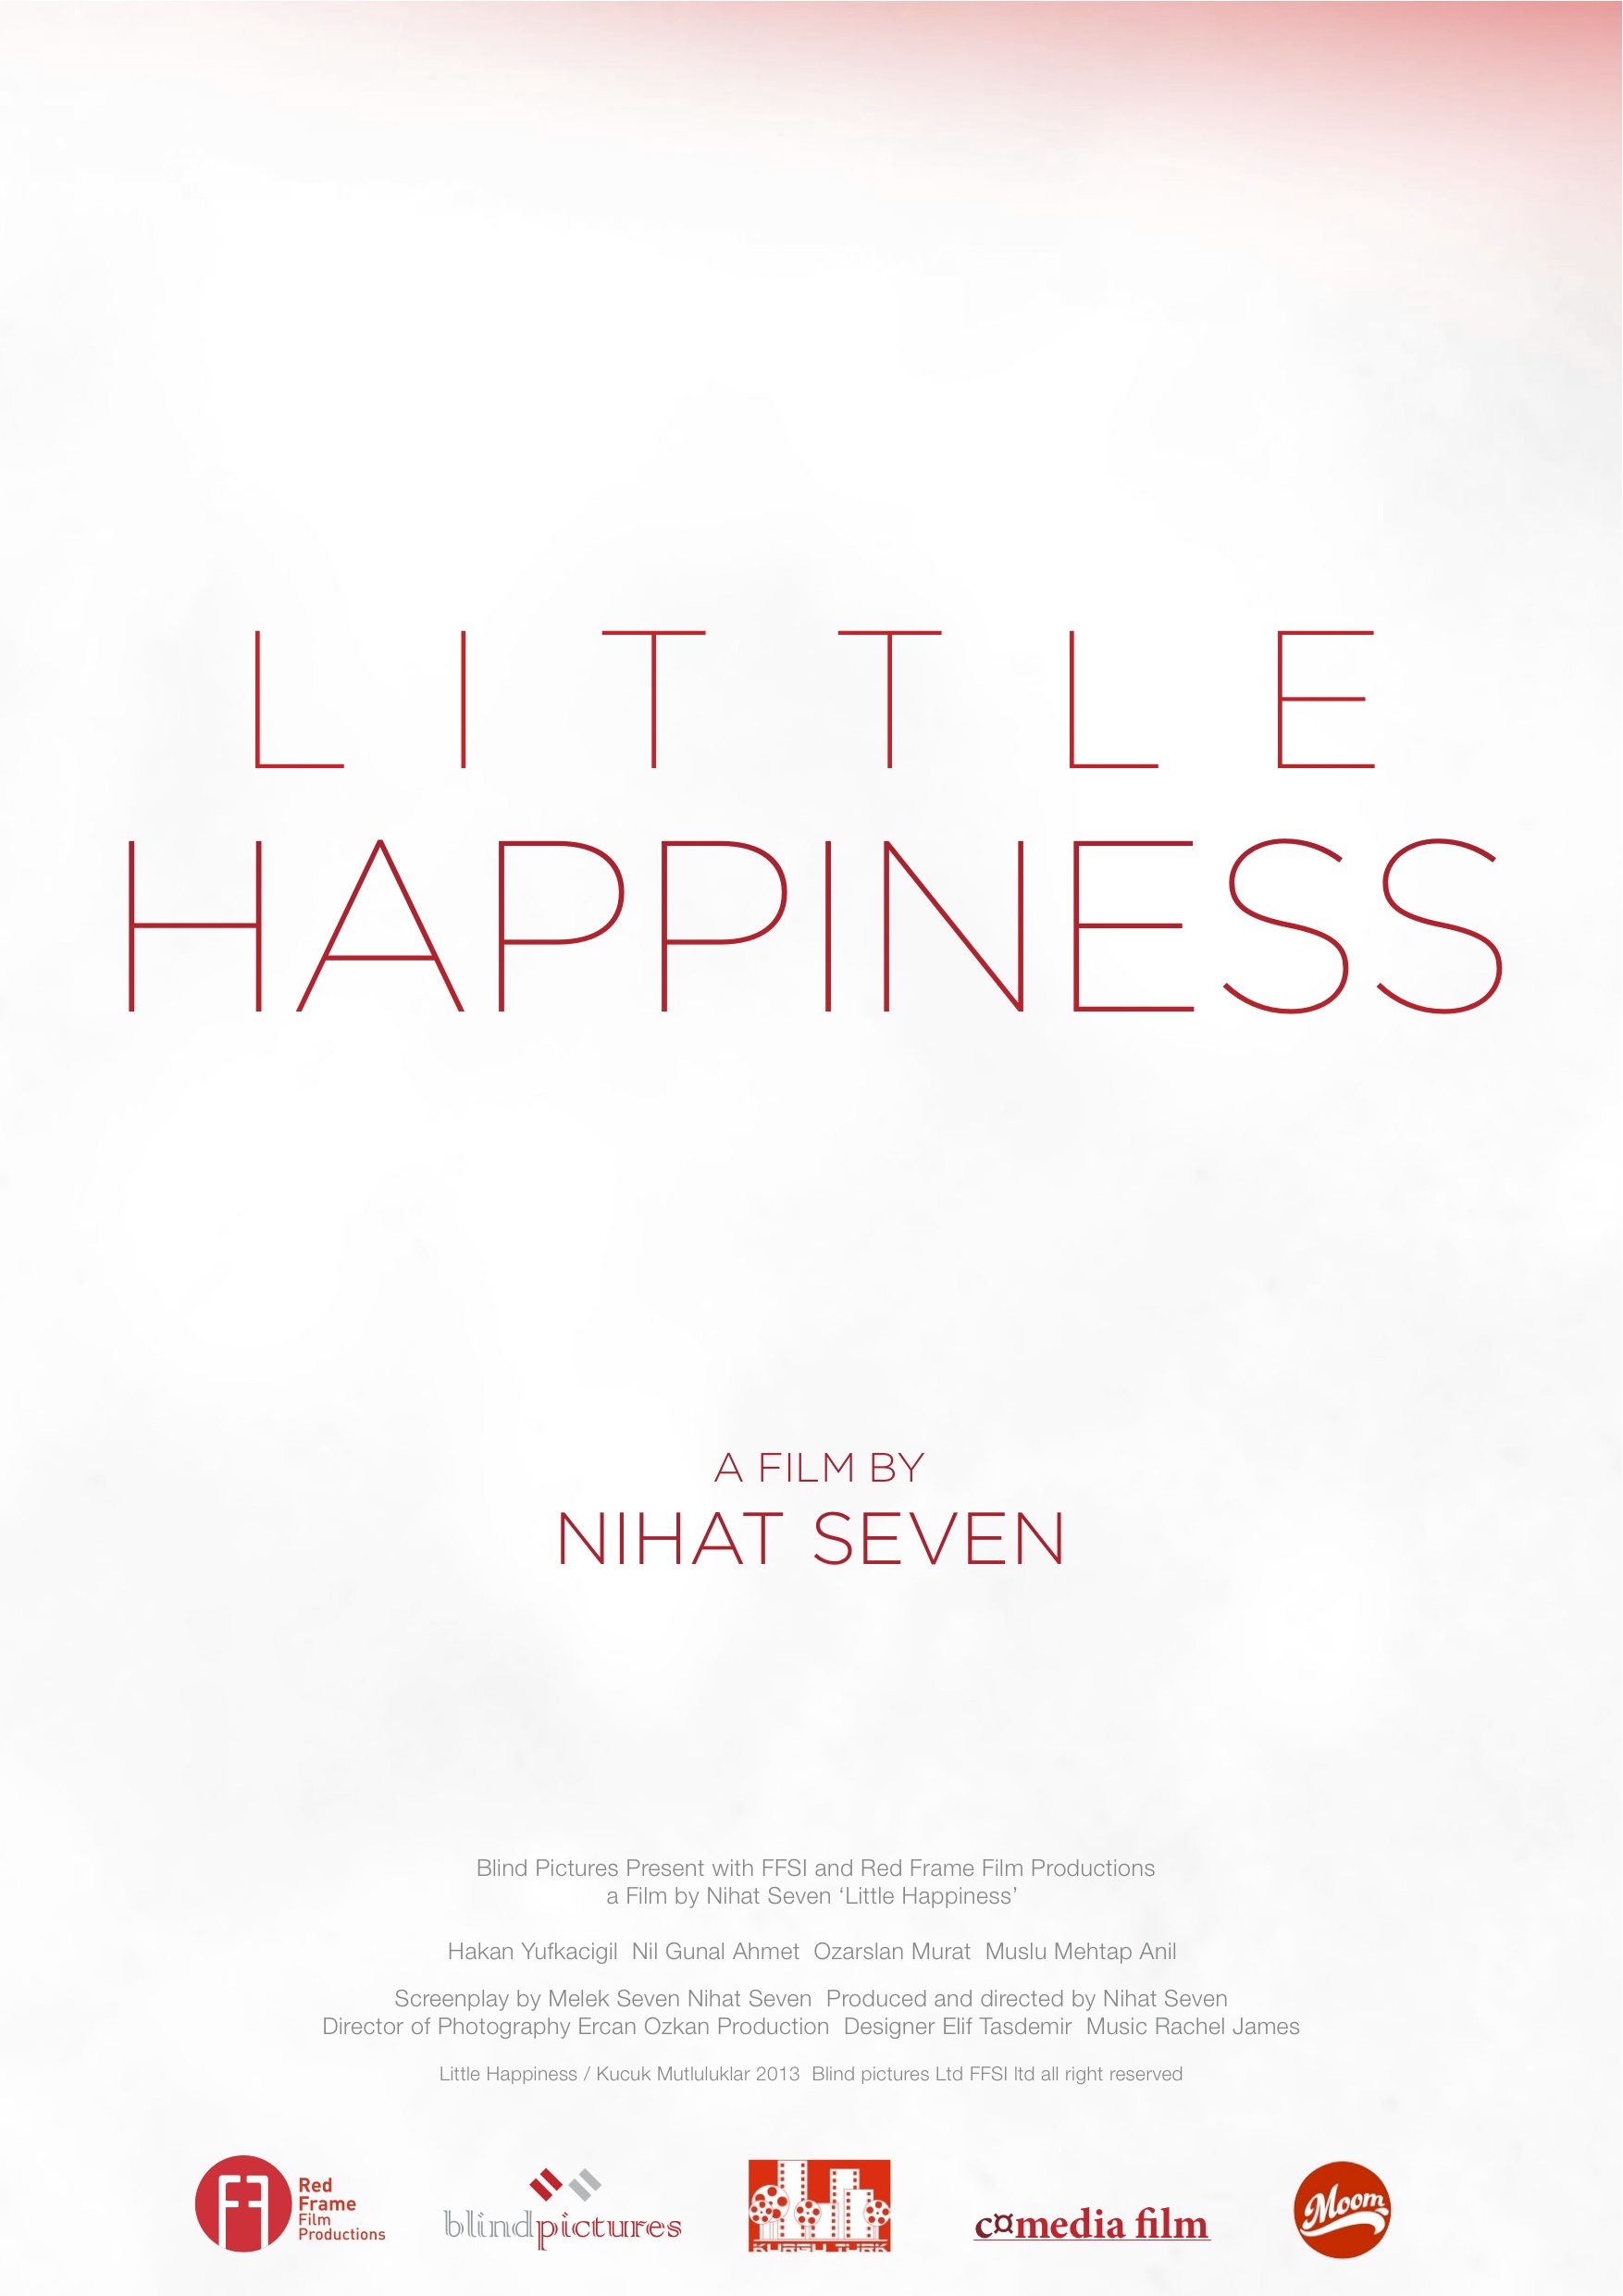 Little Happines by Nihat Seven